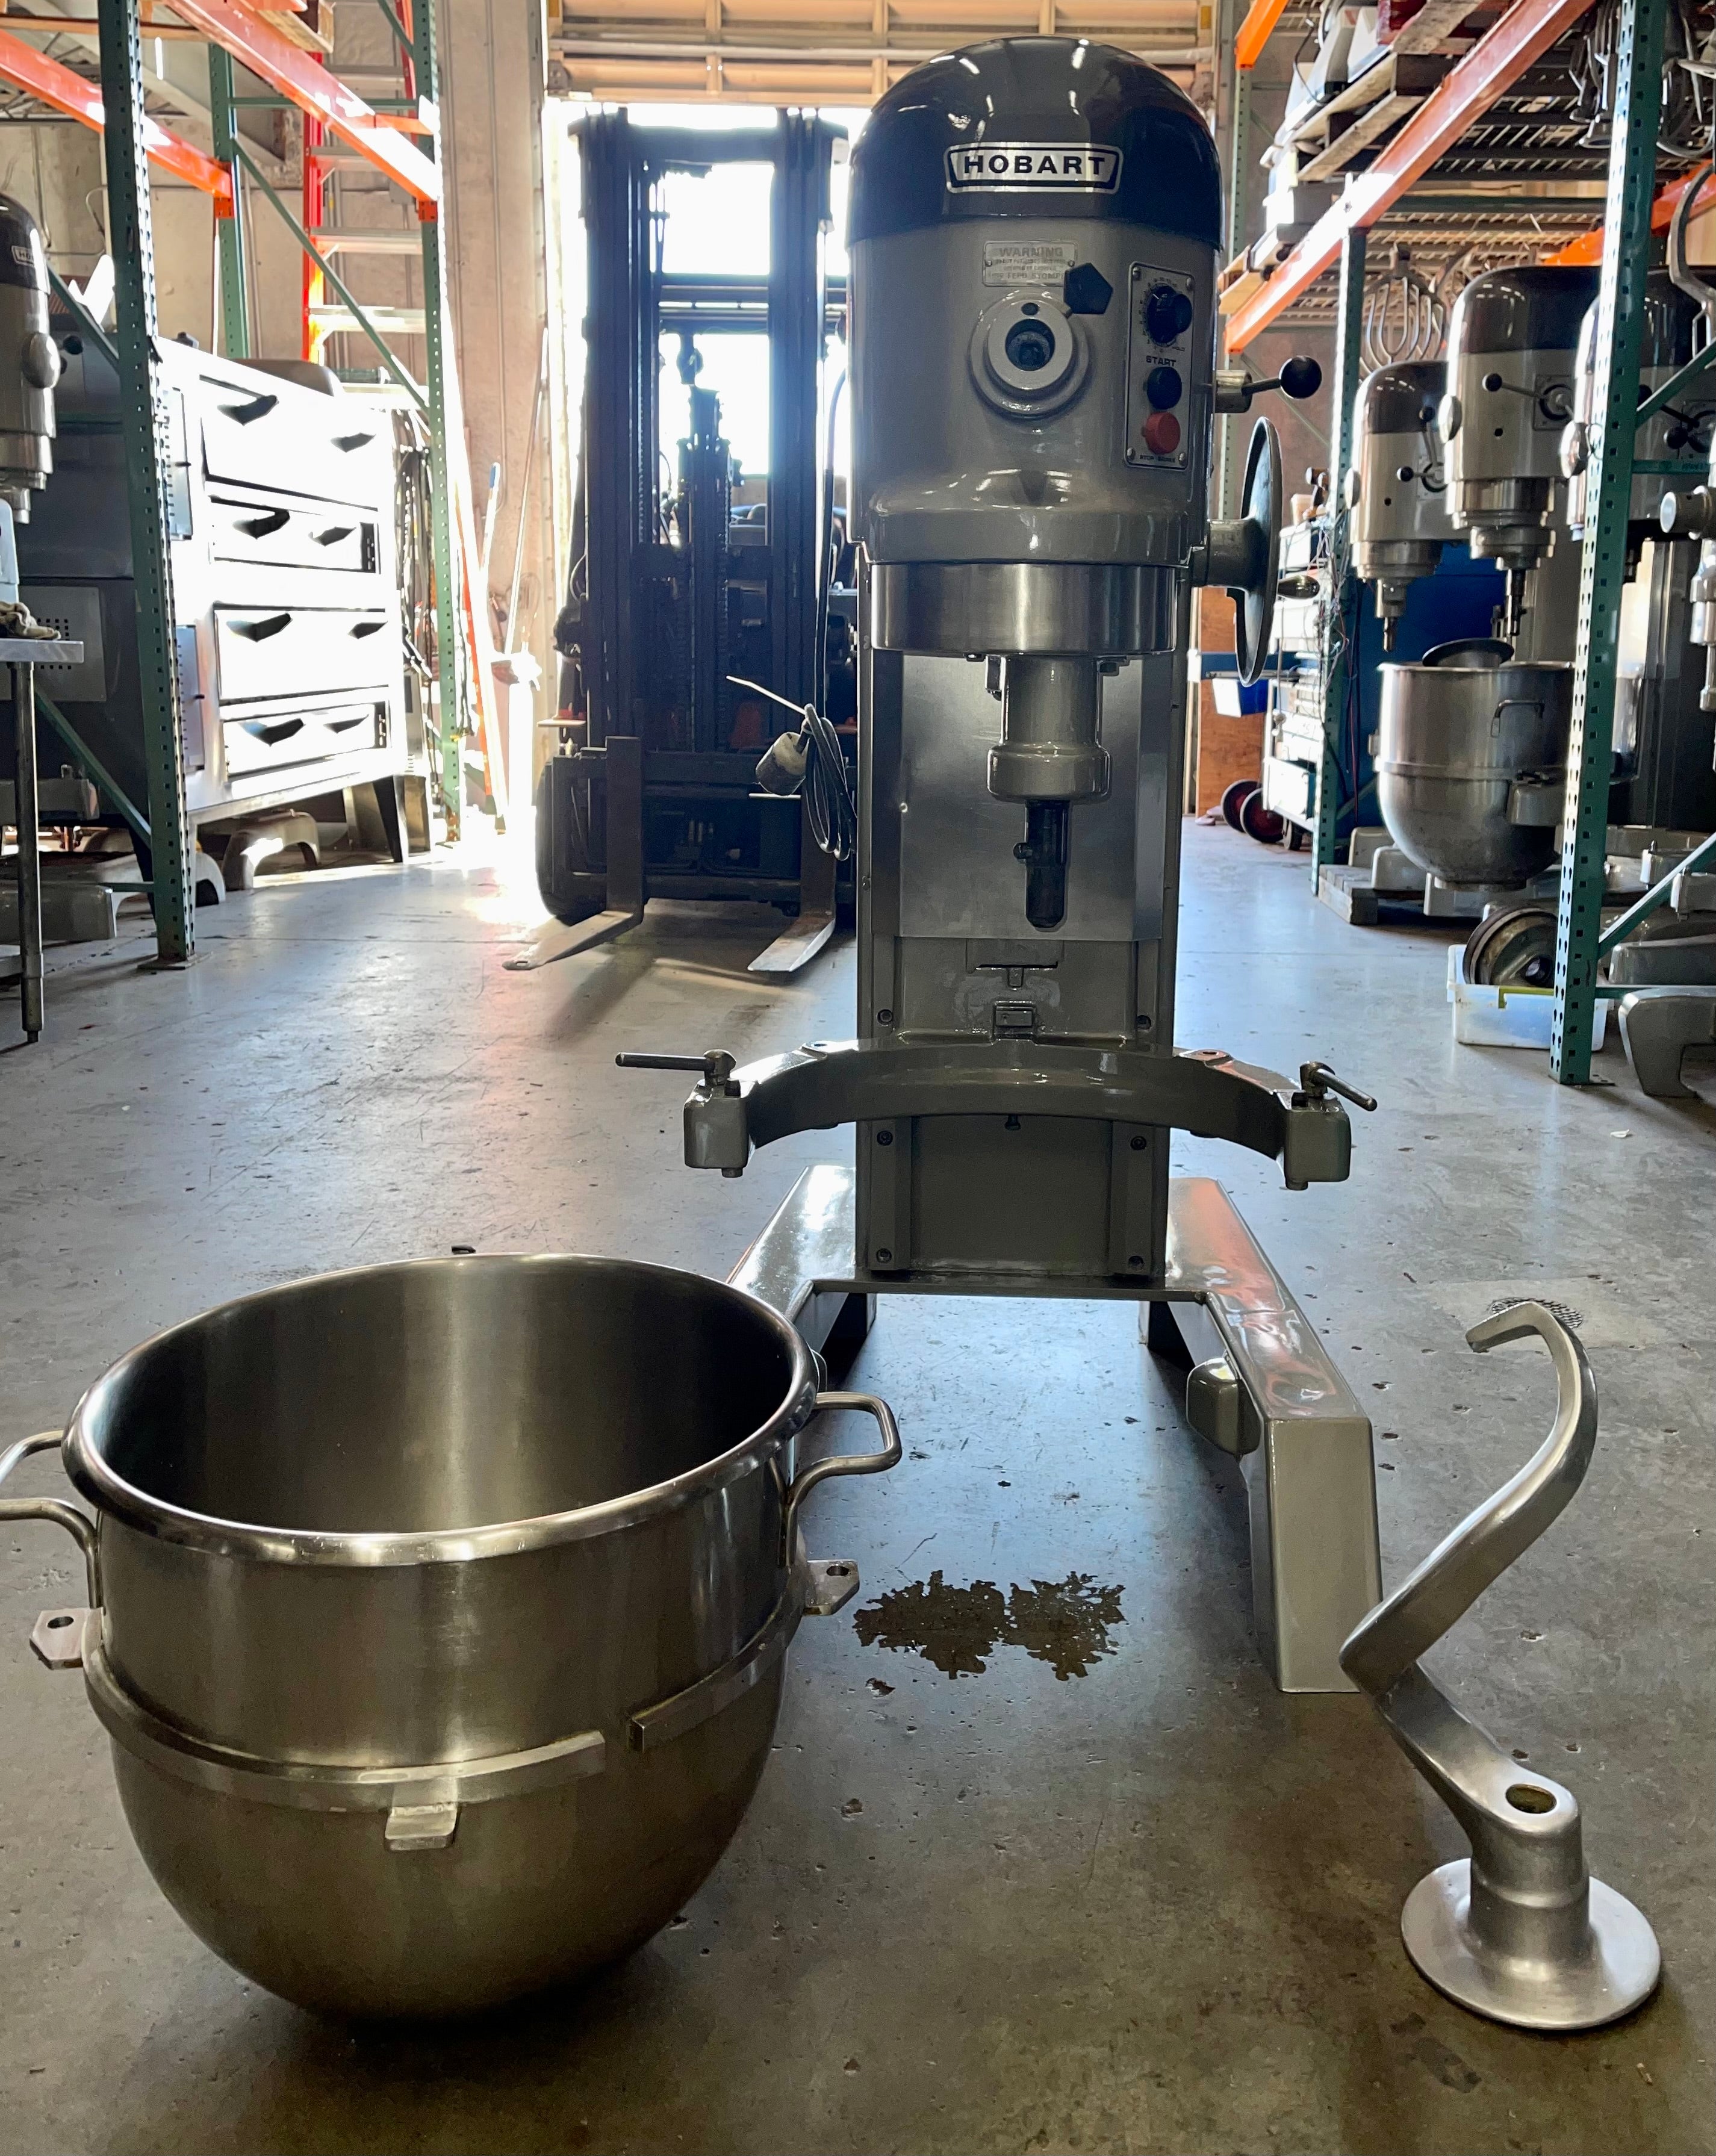 Hobart H600t 60 quart mixer w timer 1 phase 2 HP comes with stainless steel bowl and one attachment